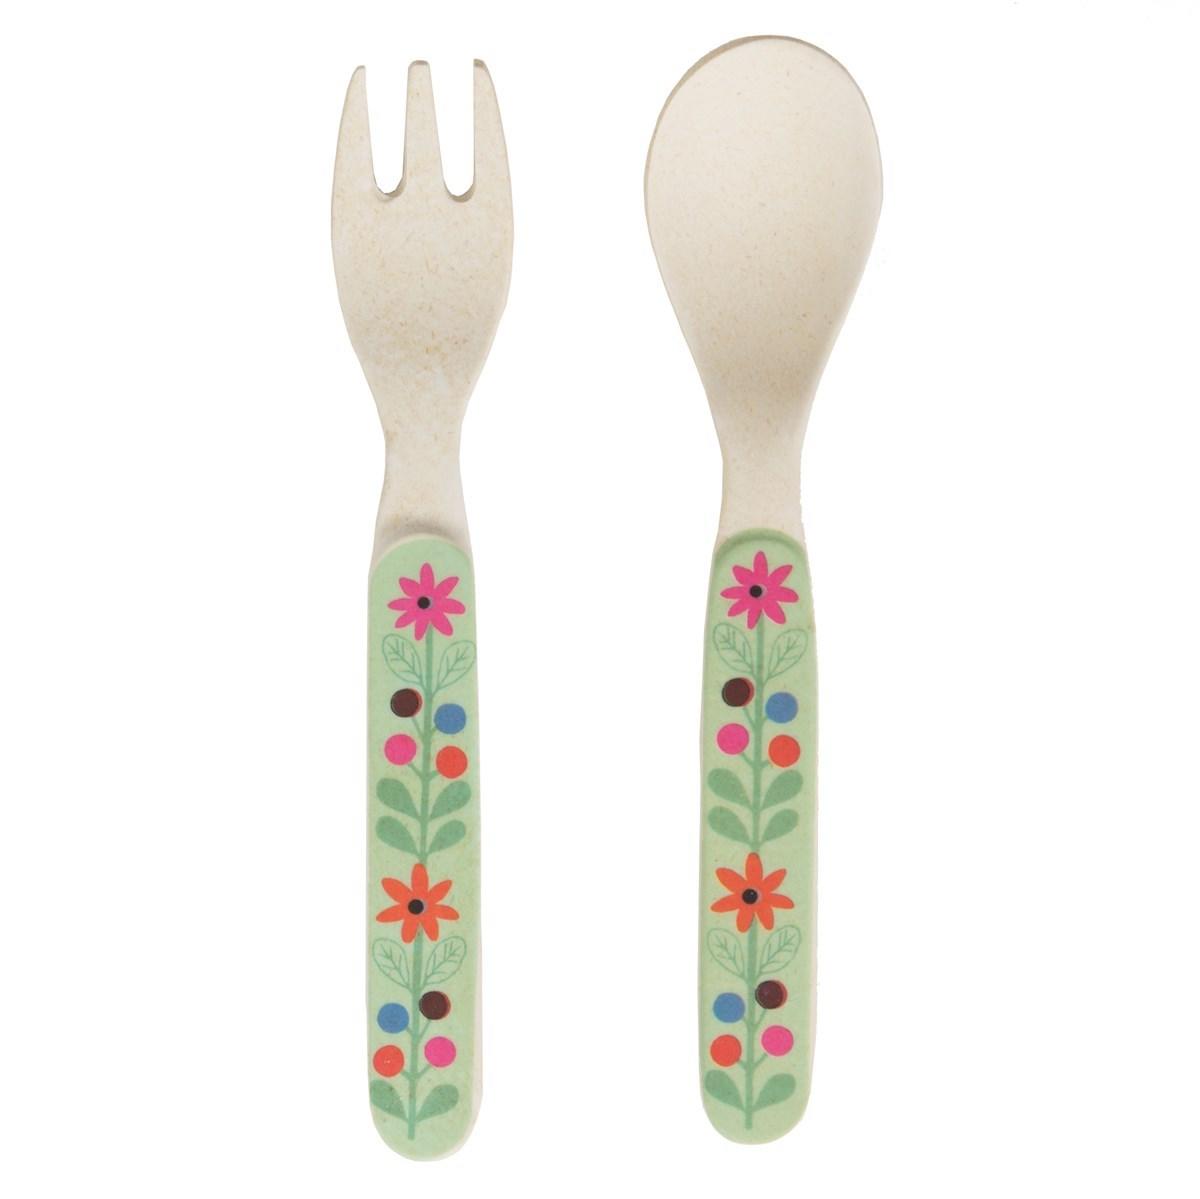 Woodland Friends fork and spoon